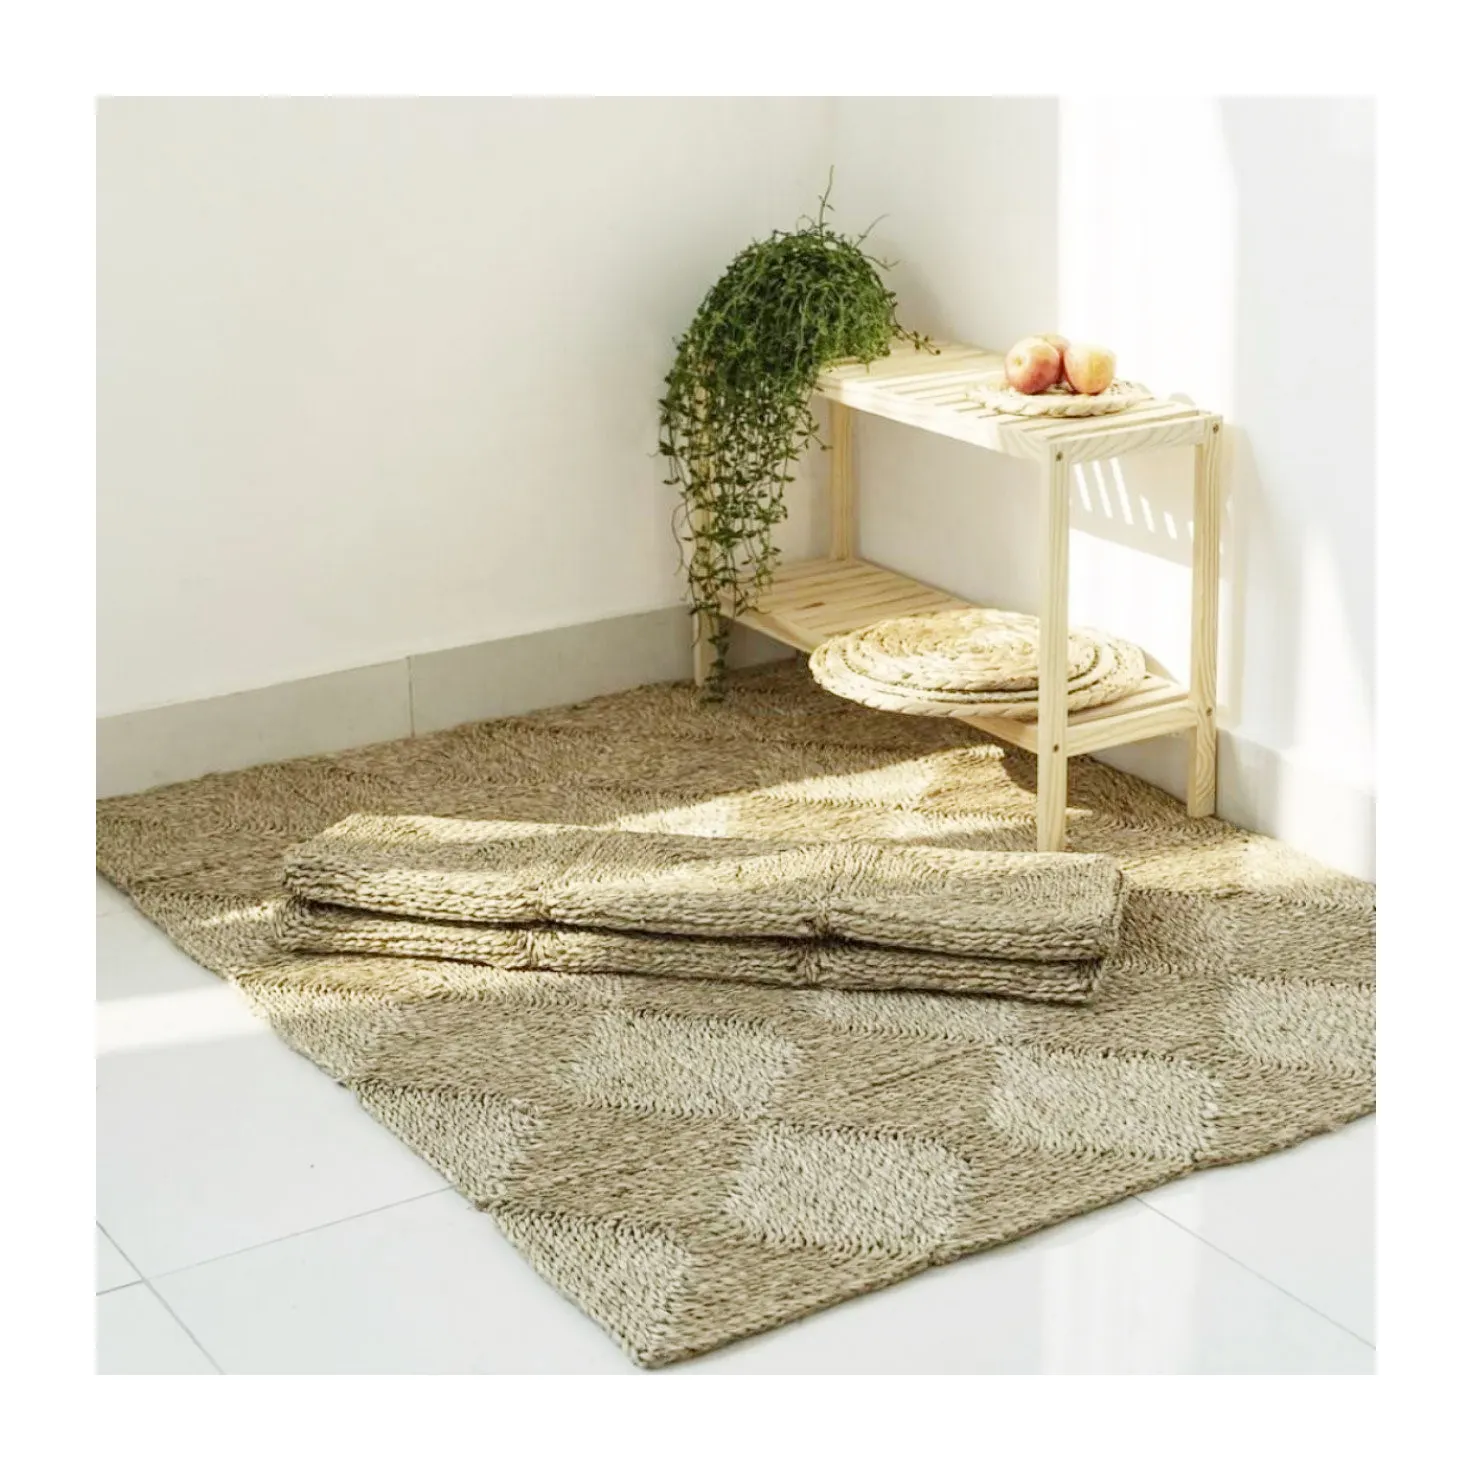 Eco-friendly unique large rectangle seagrass carpet rugs handmade floor mat handwoven runner carpets for room decor